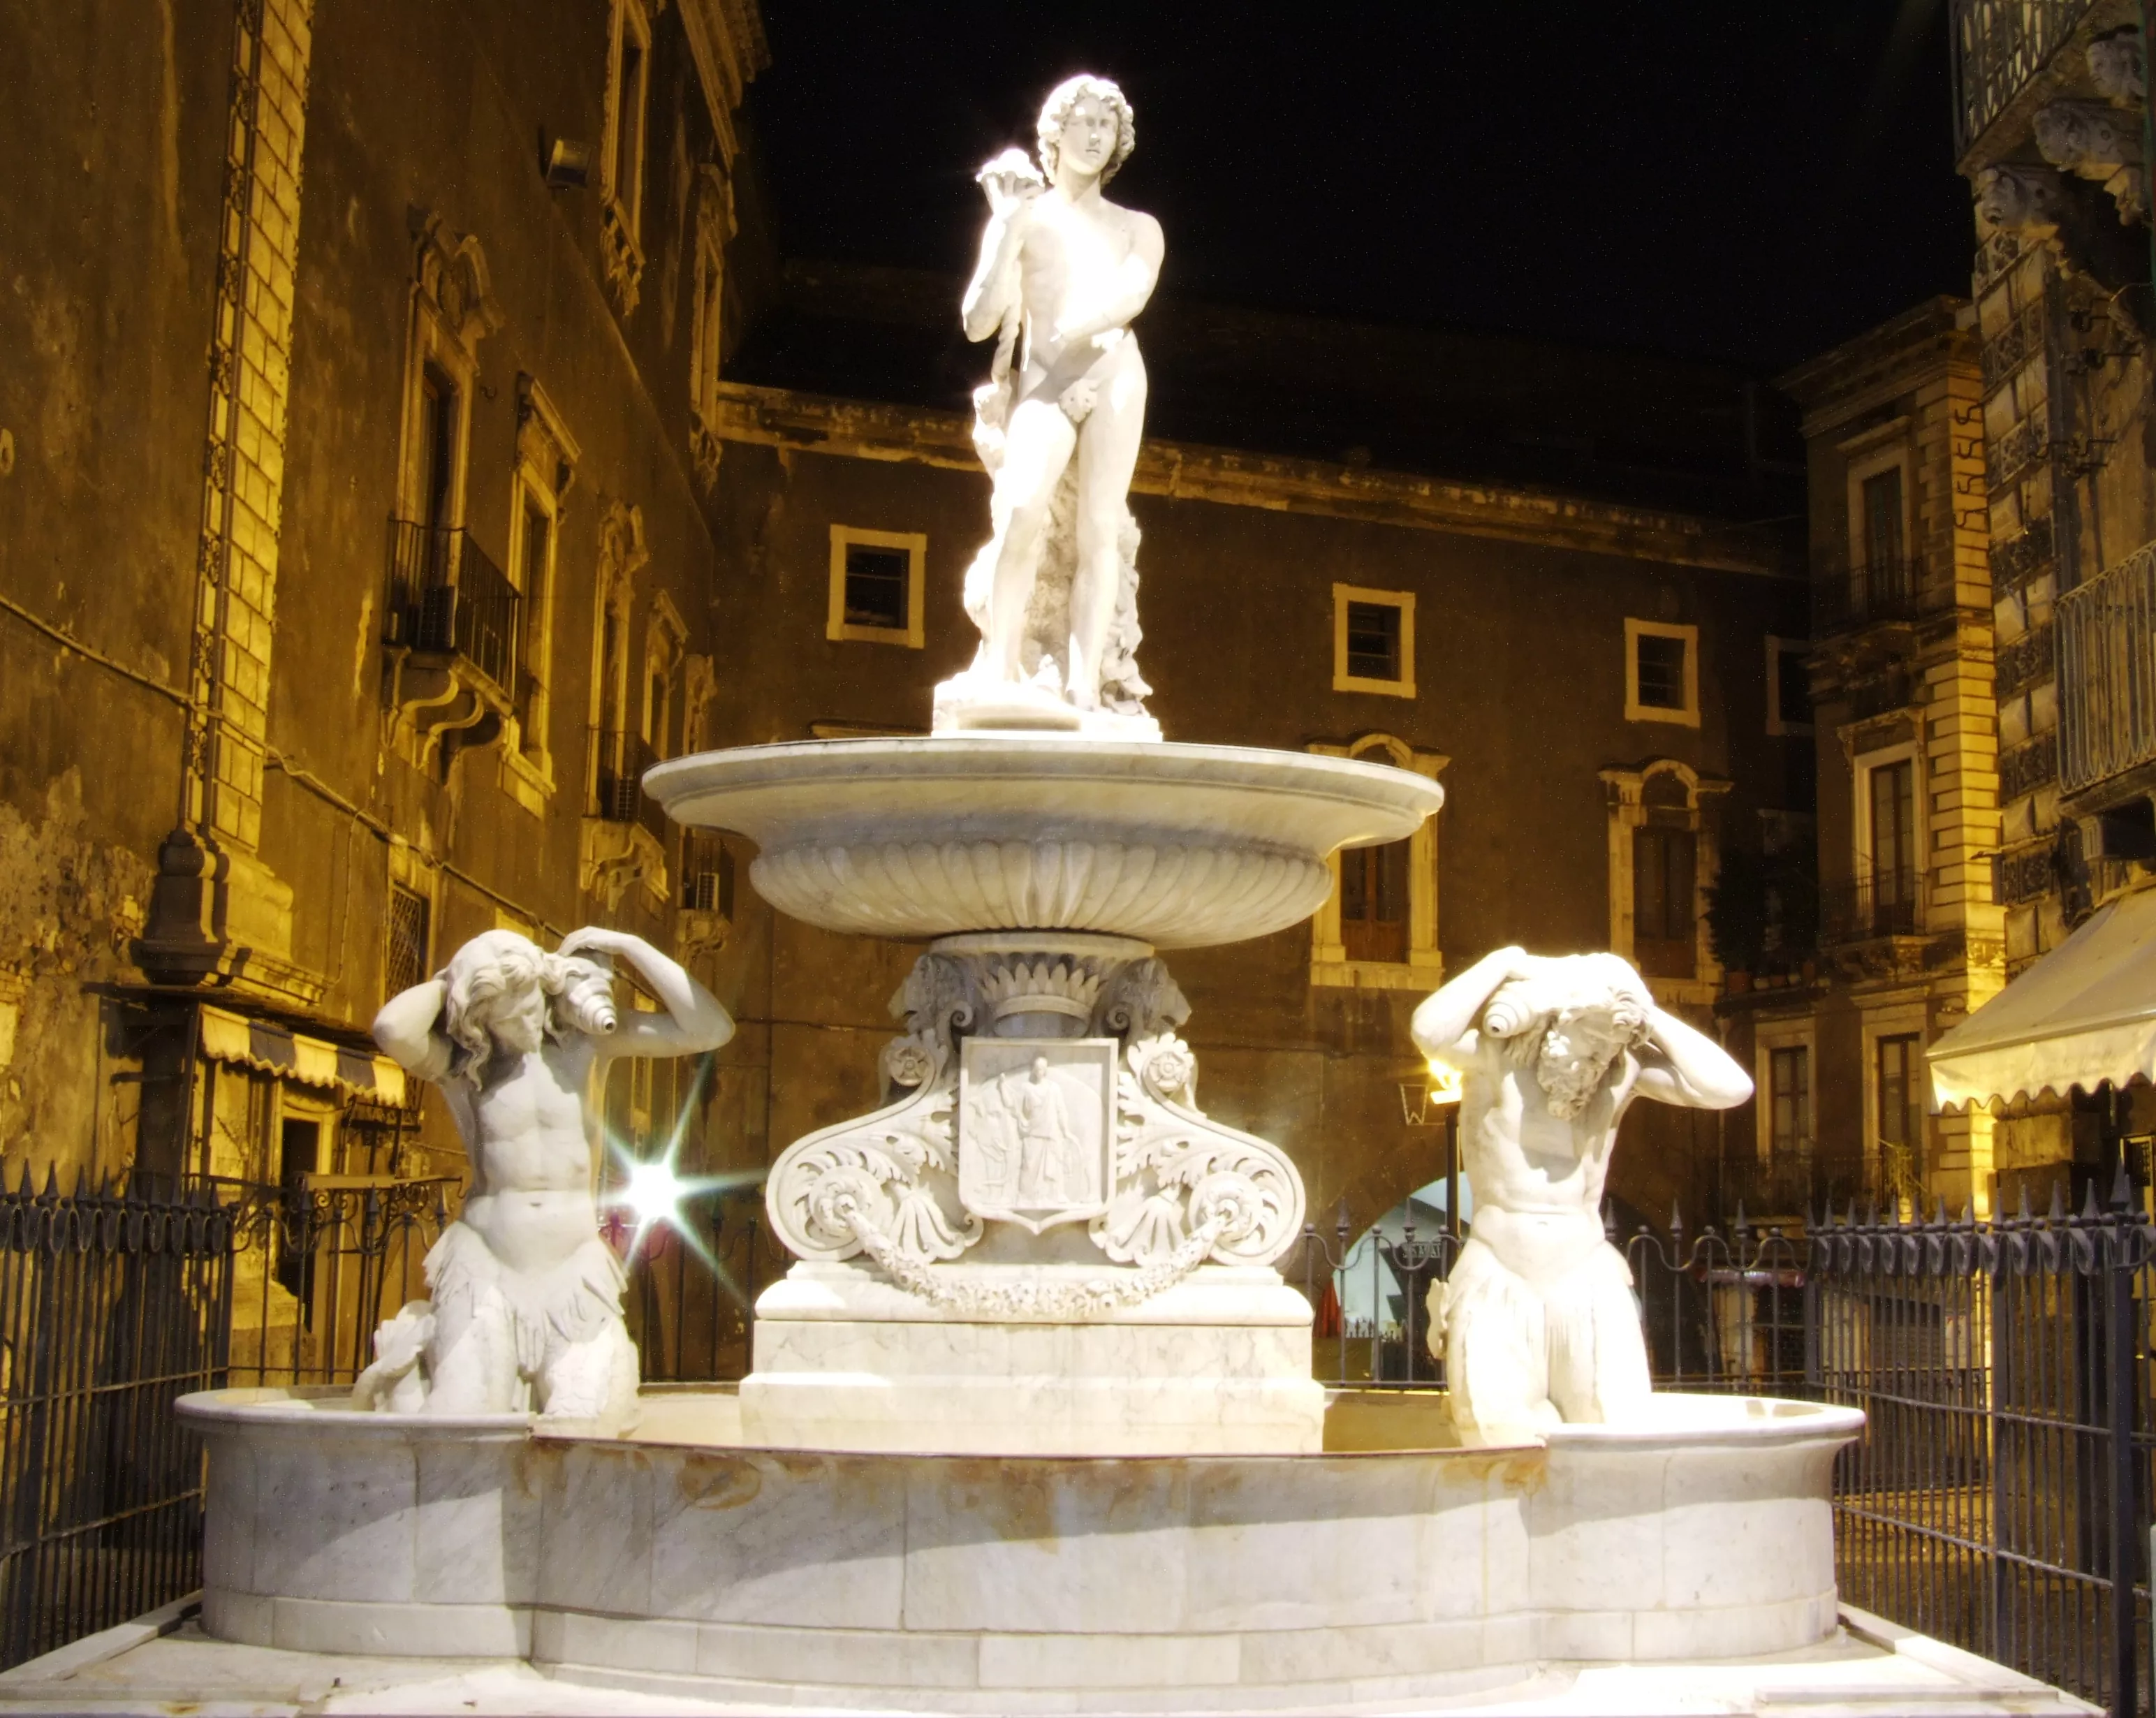 Fontana dell'Amenano in Italy, Europe | Architecture - Rated 3.7